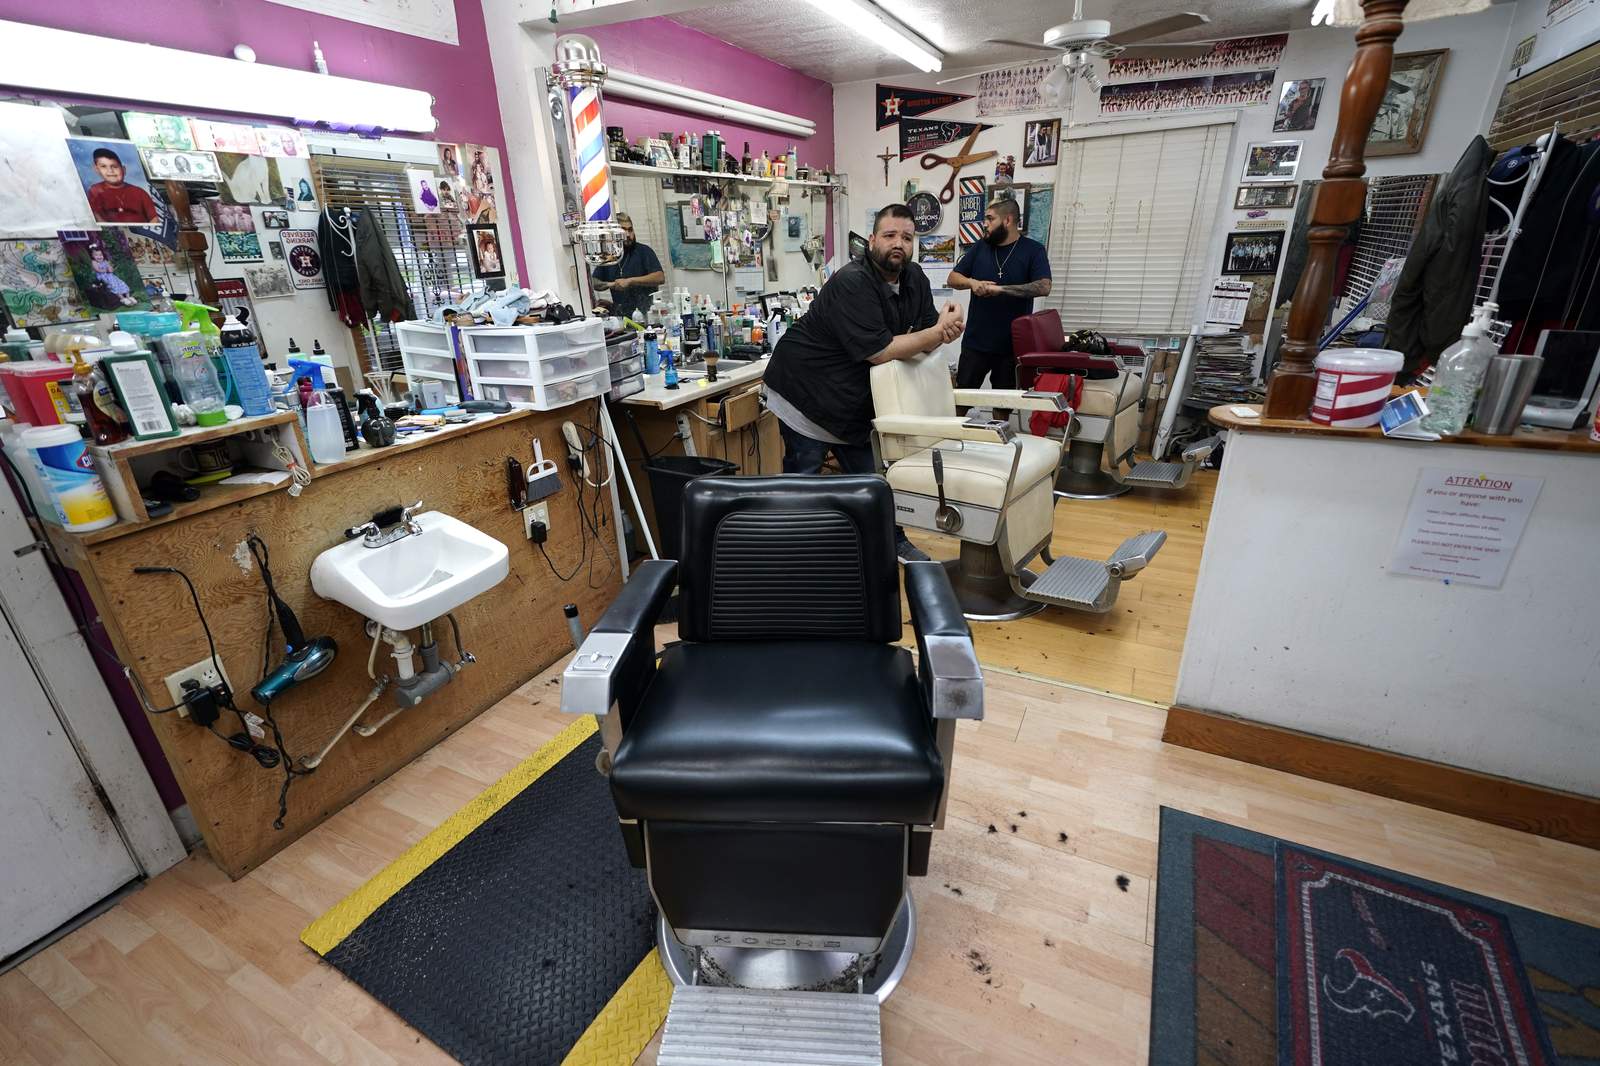 After Montgomery County judge questions Gov. Abbott’s order, AG doubles down saying salons, bars, gyms can’t reopen Friday